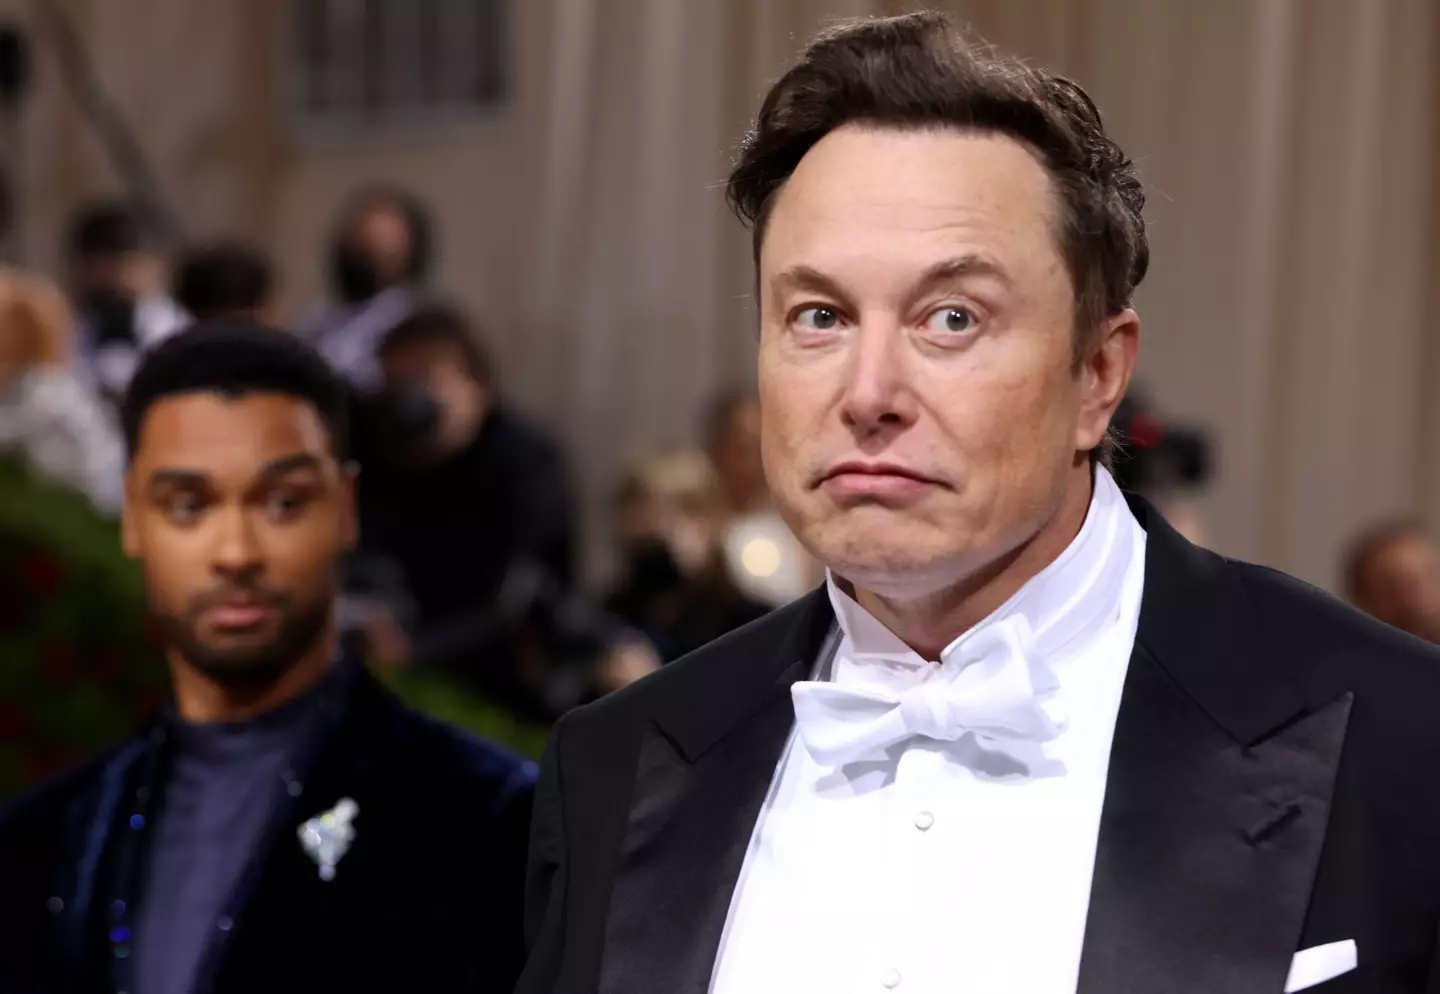 Elon Musk has revealed he hasn't 'had sex in ages'.